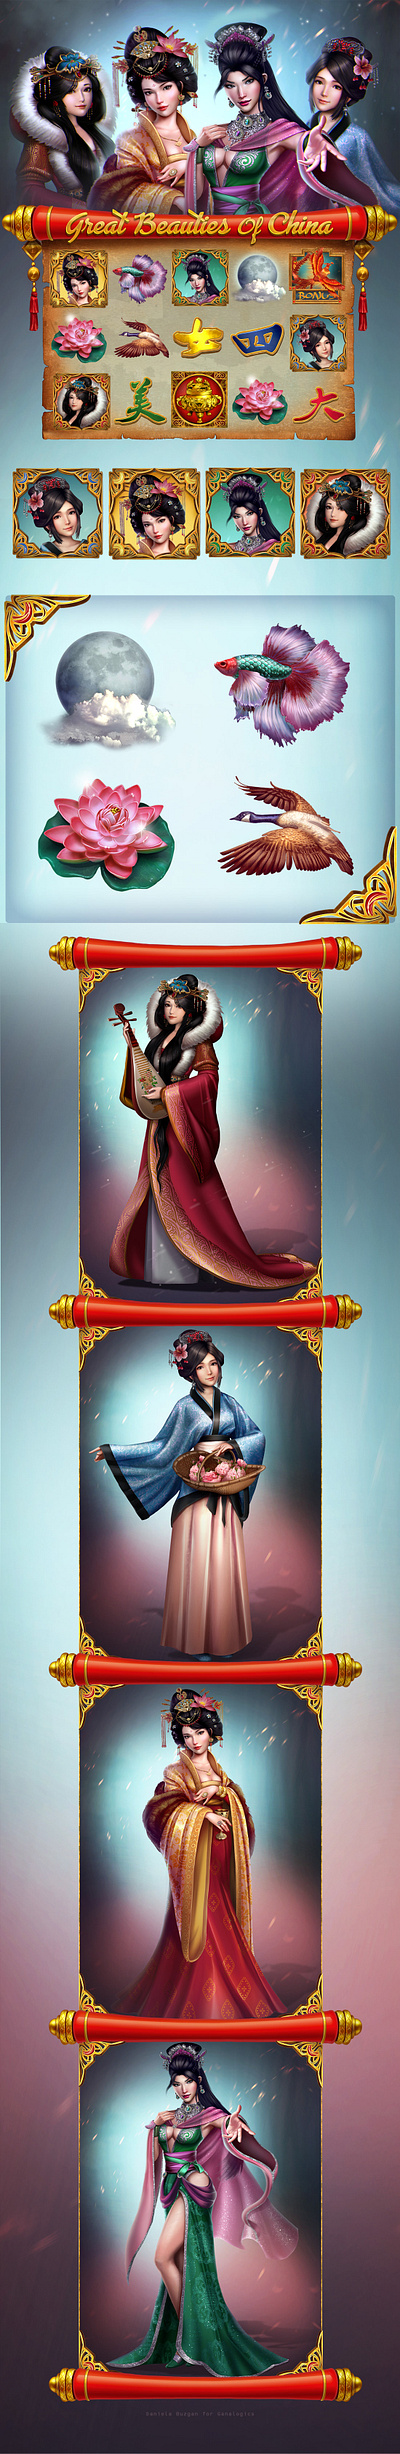 Great Beauties of China (Slot Game) 2d art casual game character design igaming illustration photoshop slot game slots